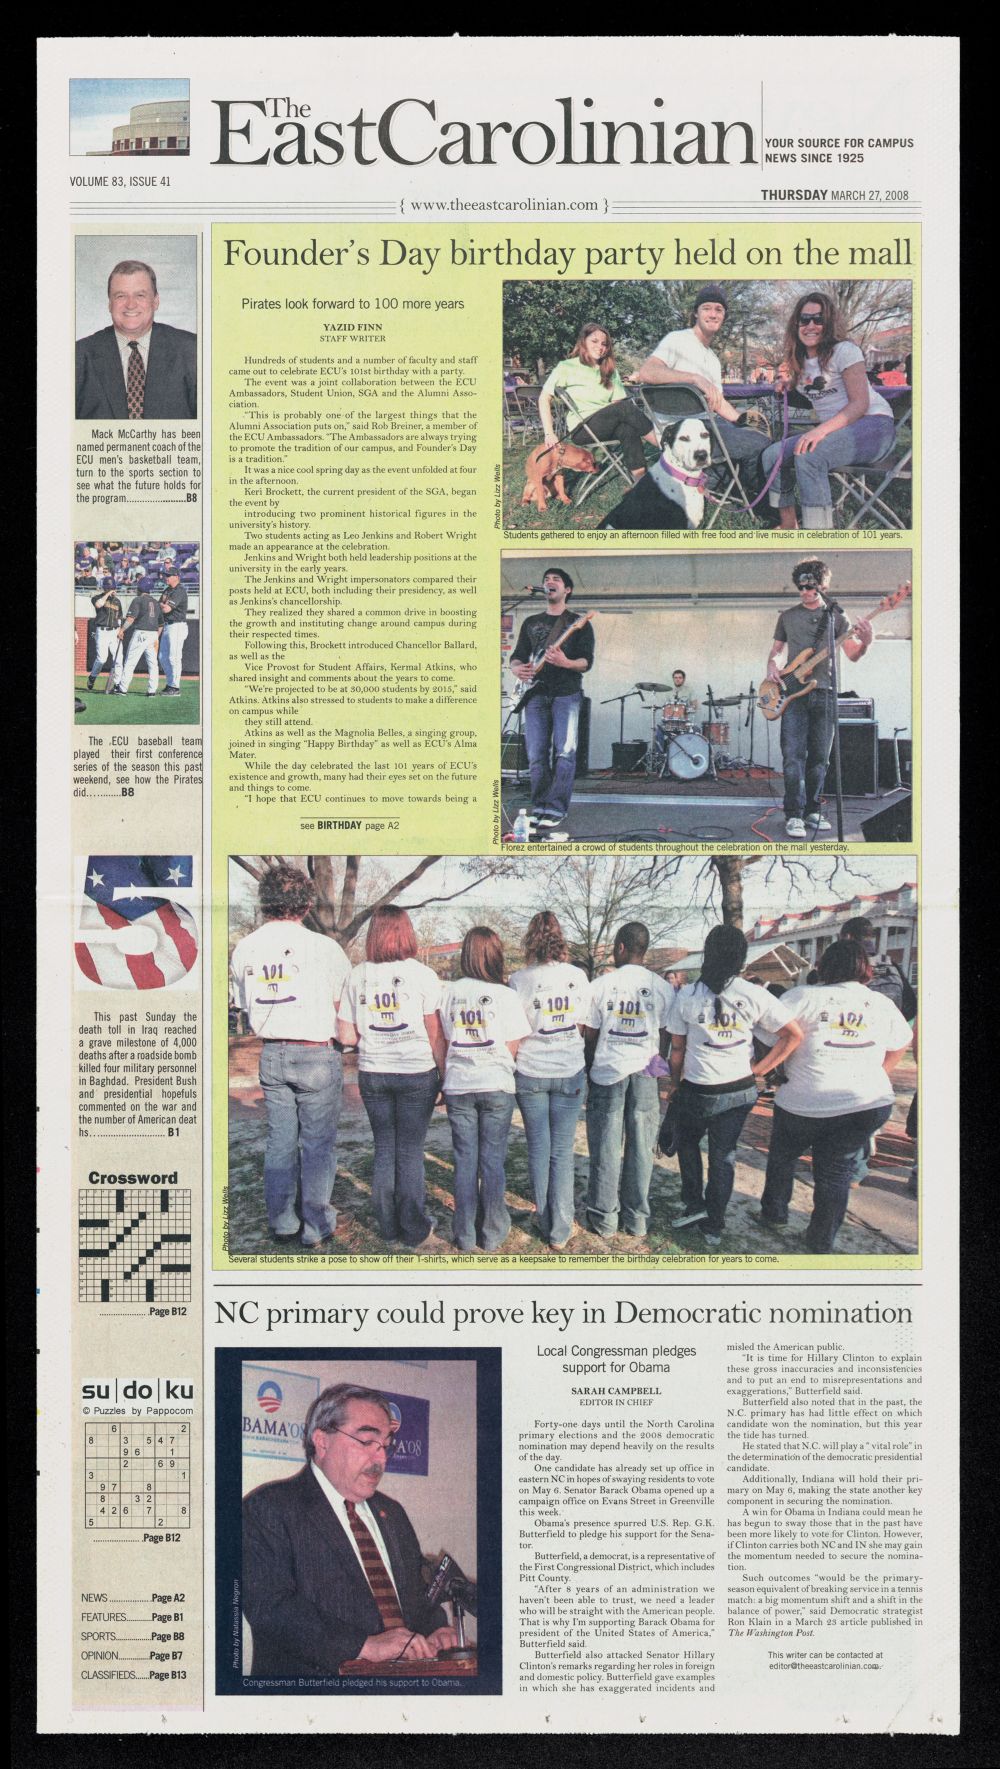 The East Carolinian, March 27, 2008 pic image